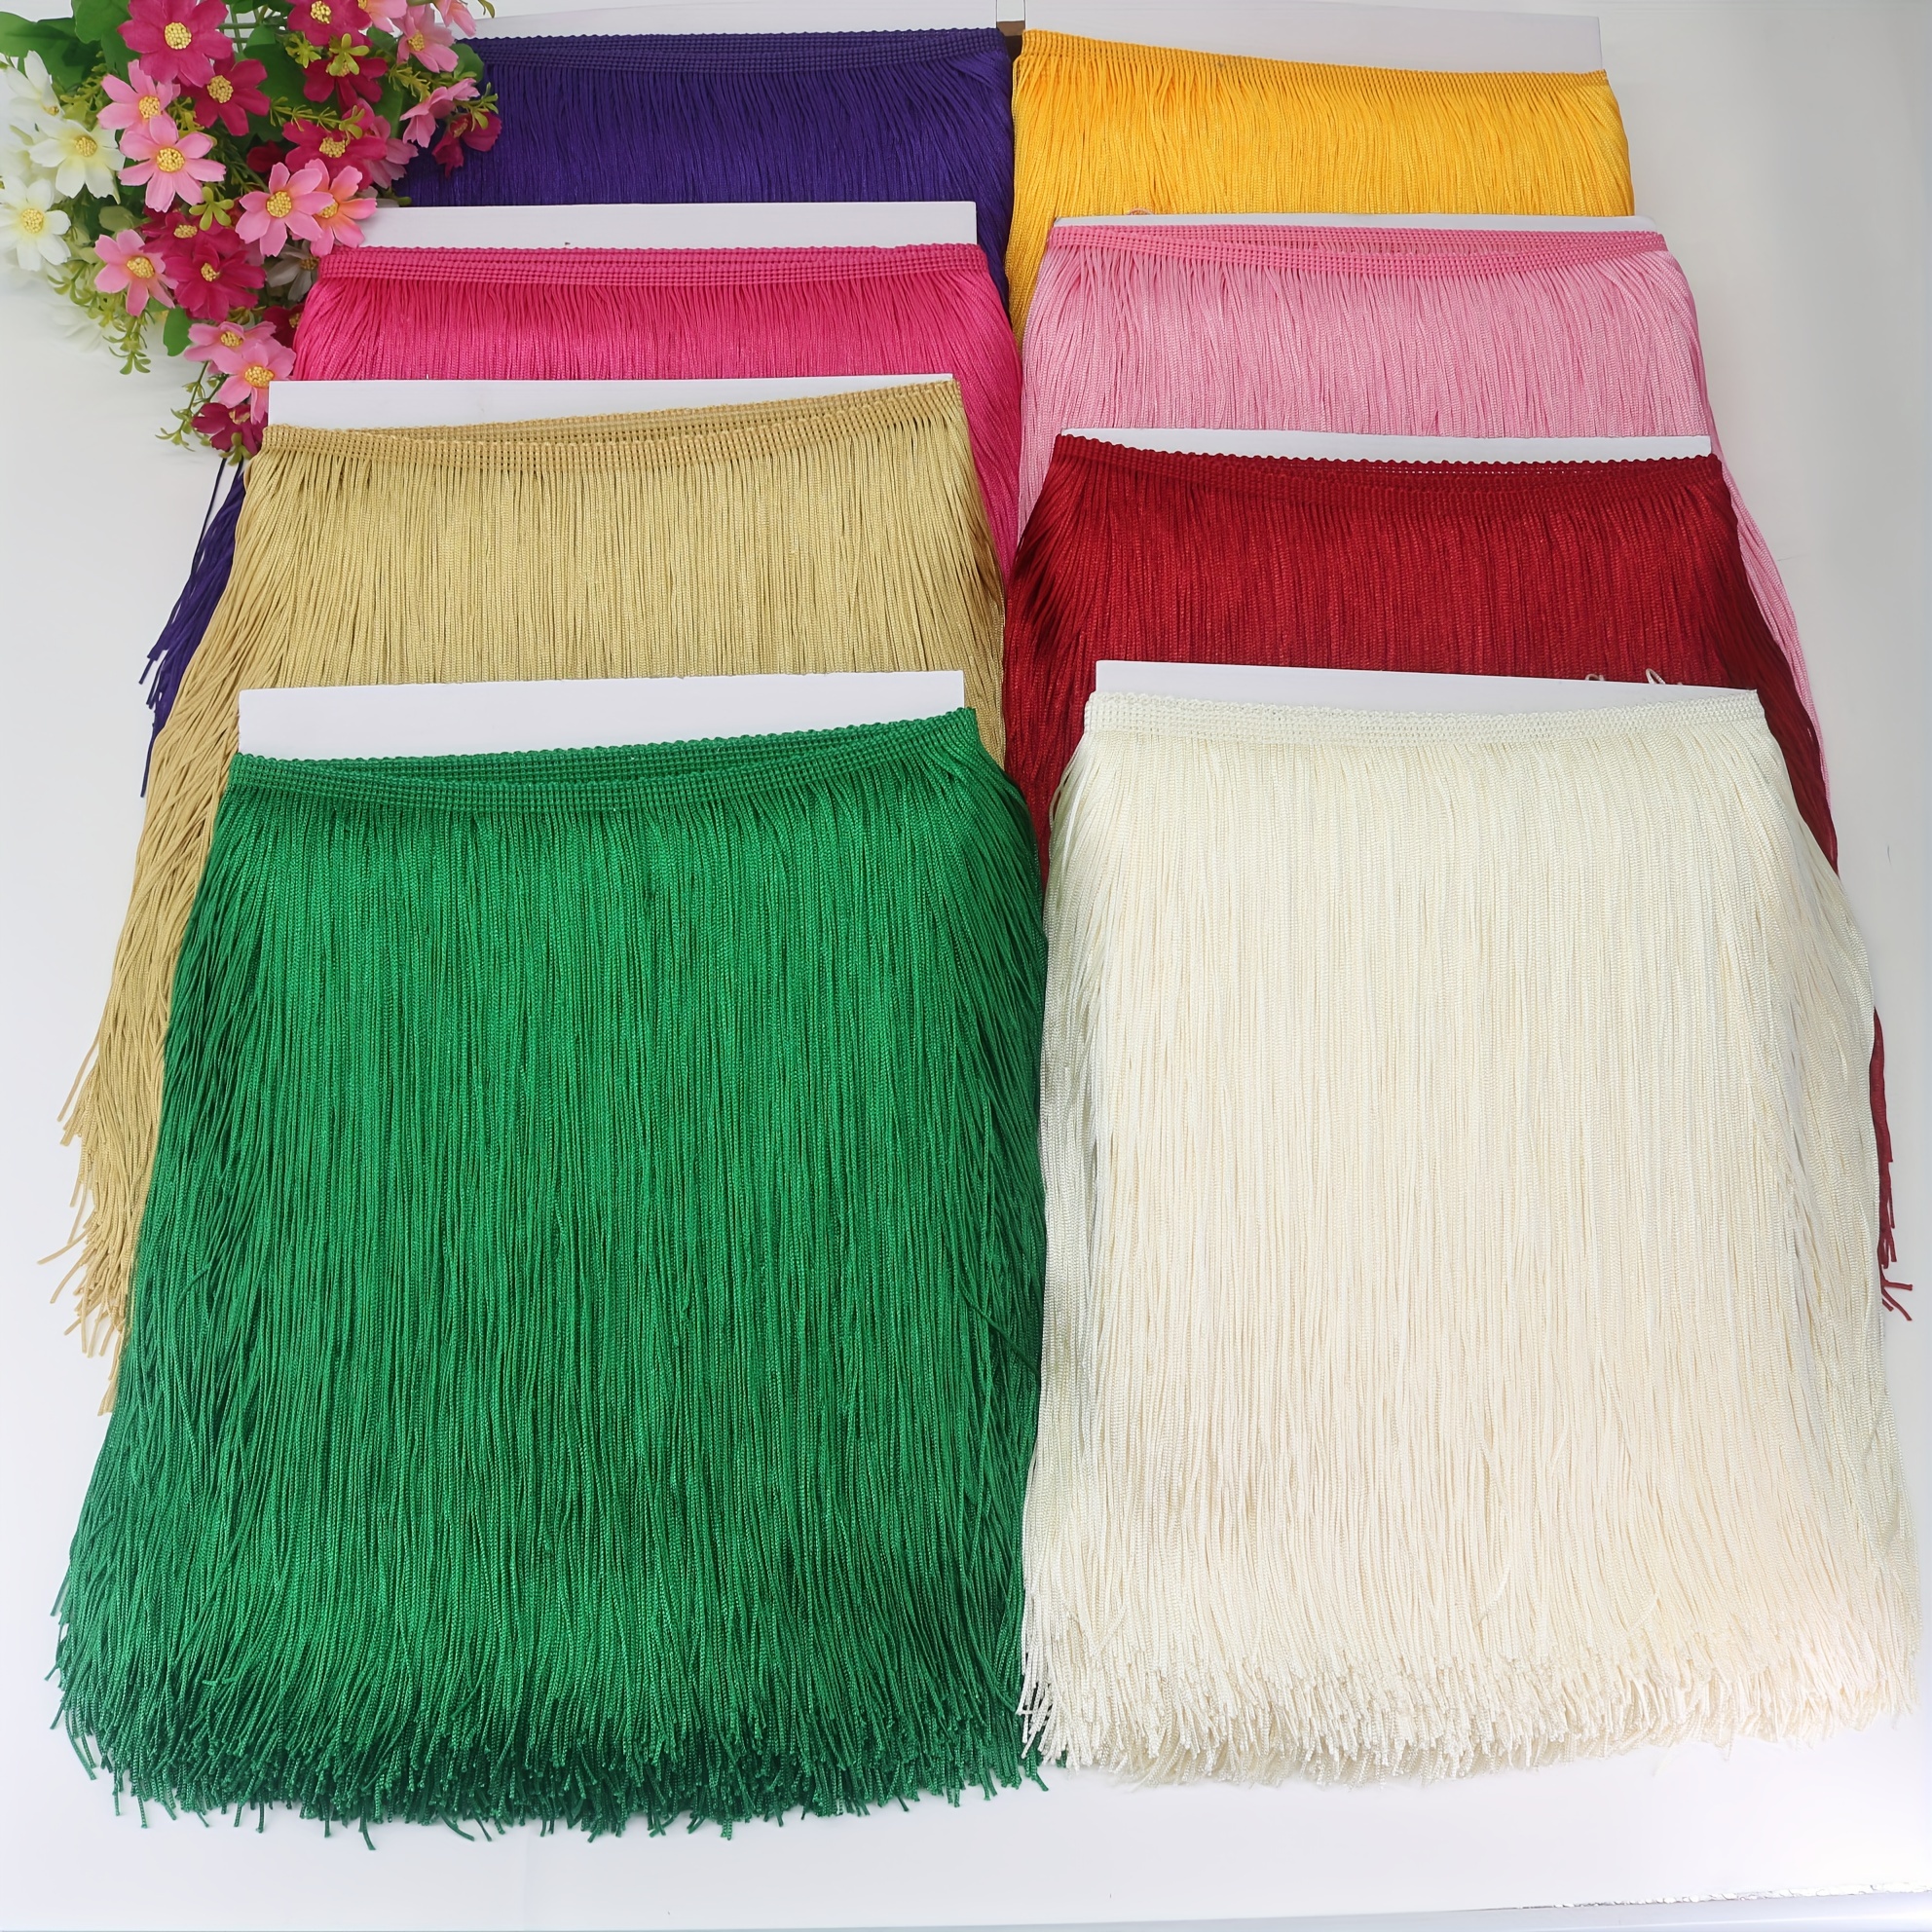 

Tassel Fringe Trim Lace 1 Yard - 30cm Width, Multicolor Selection For Sewing, Latin Dance Clothes, Diy Apparel, Arts Crafts, Prom, Holiday Decoration Supplies